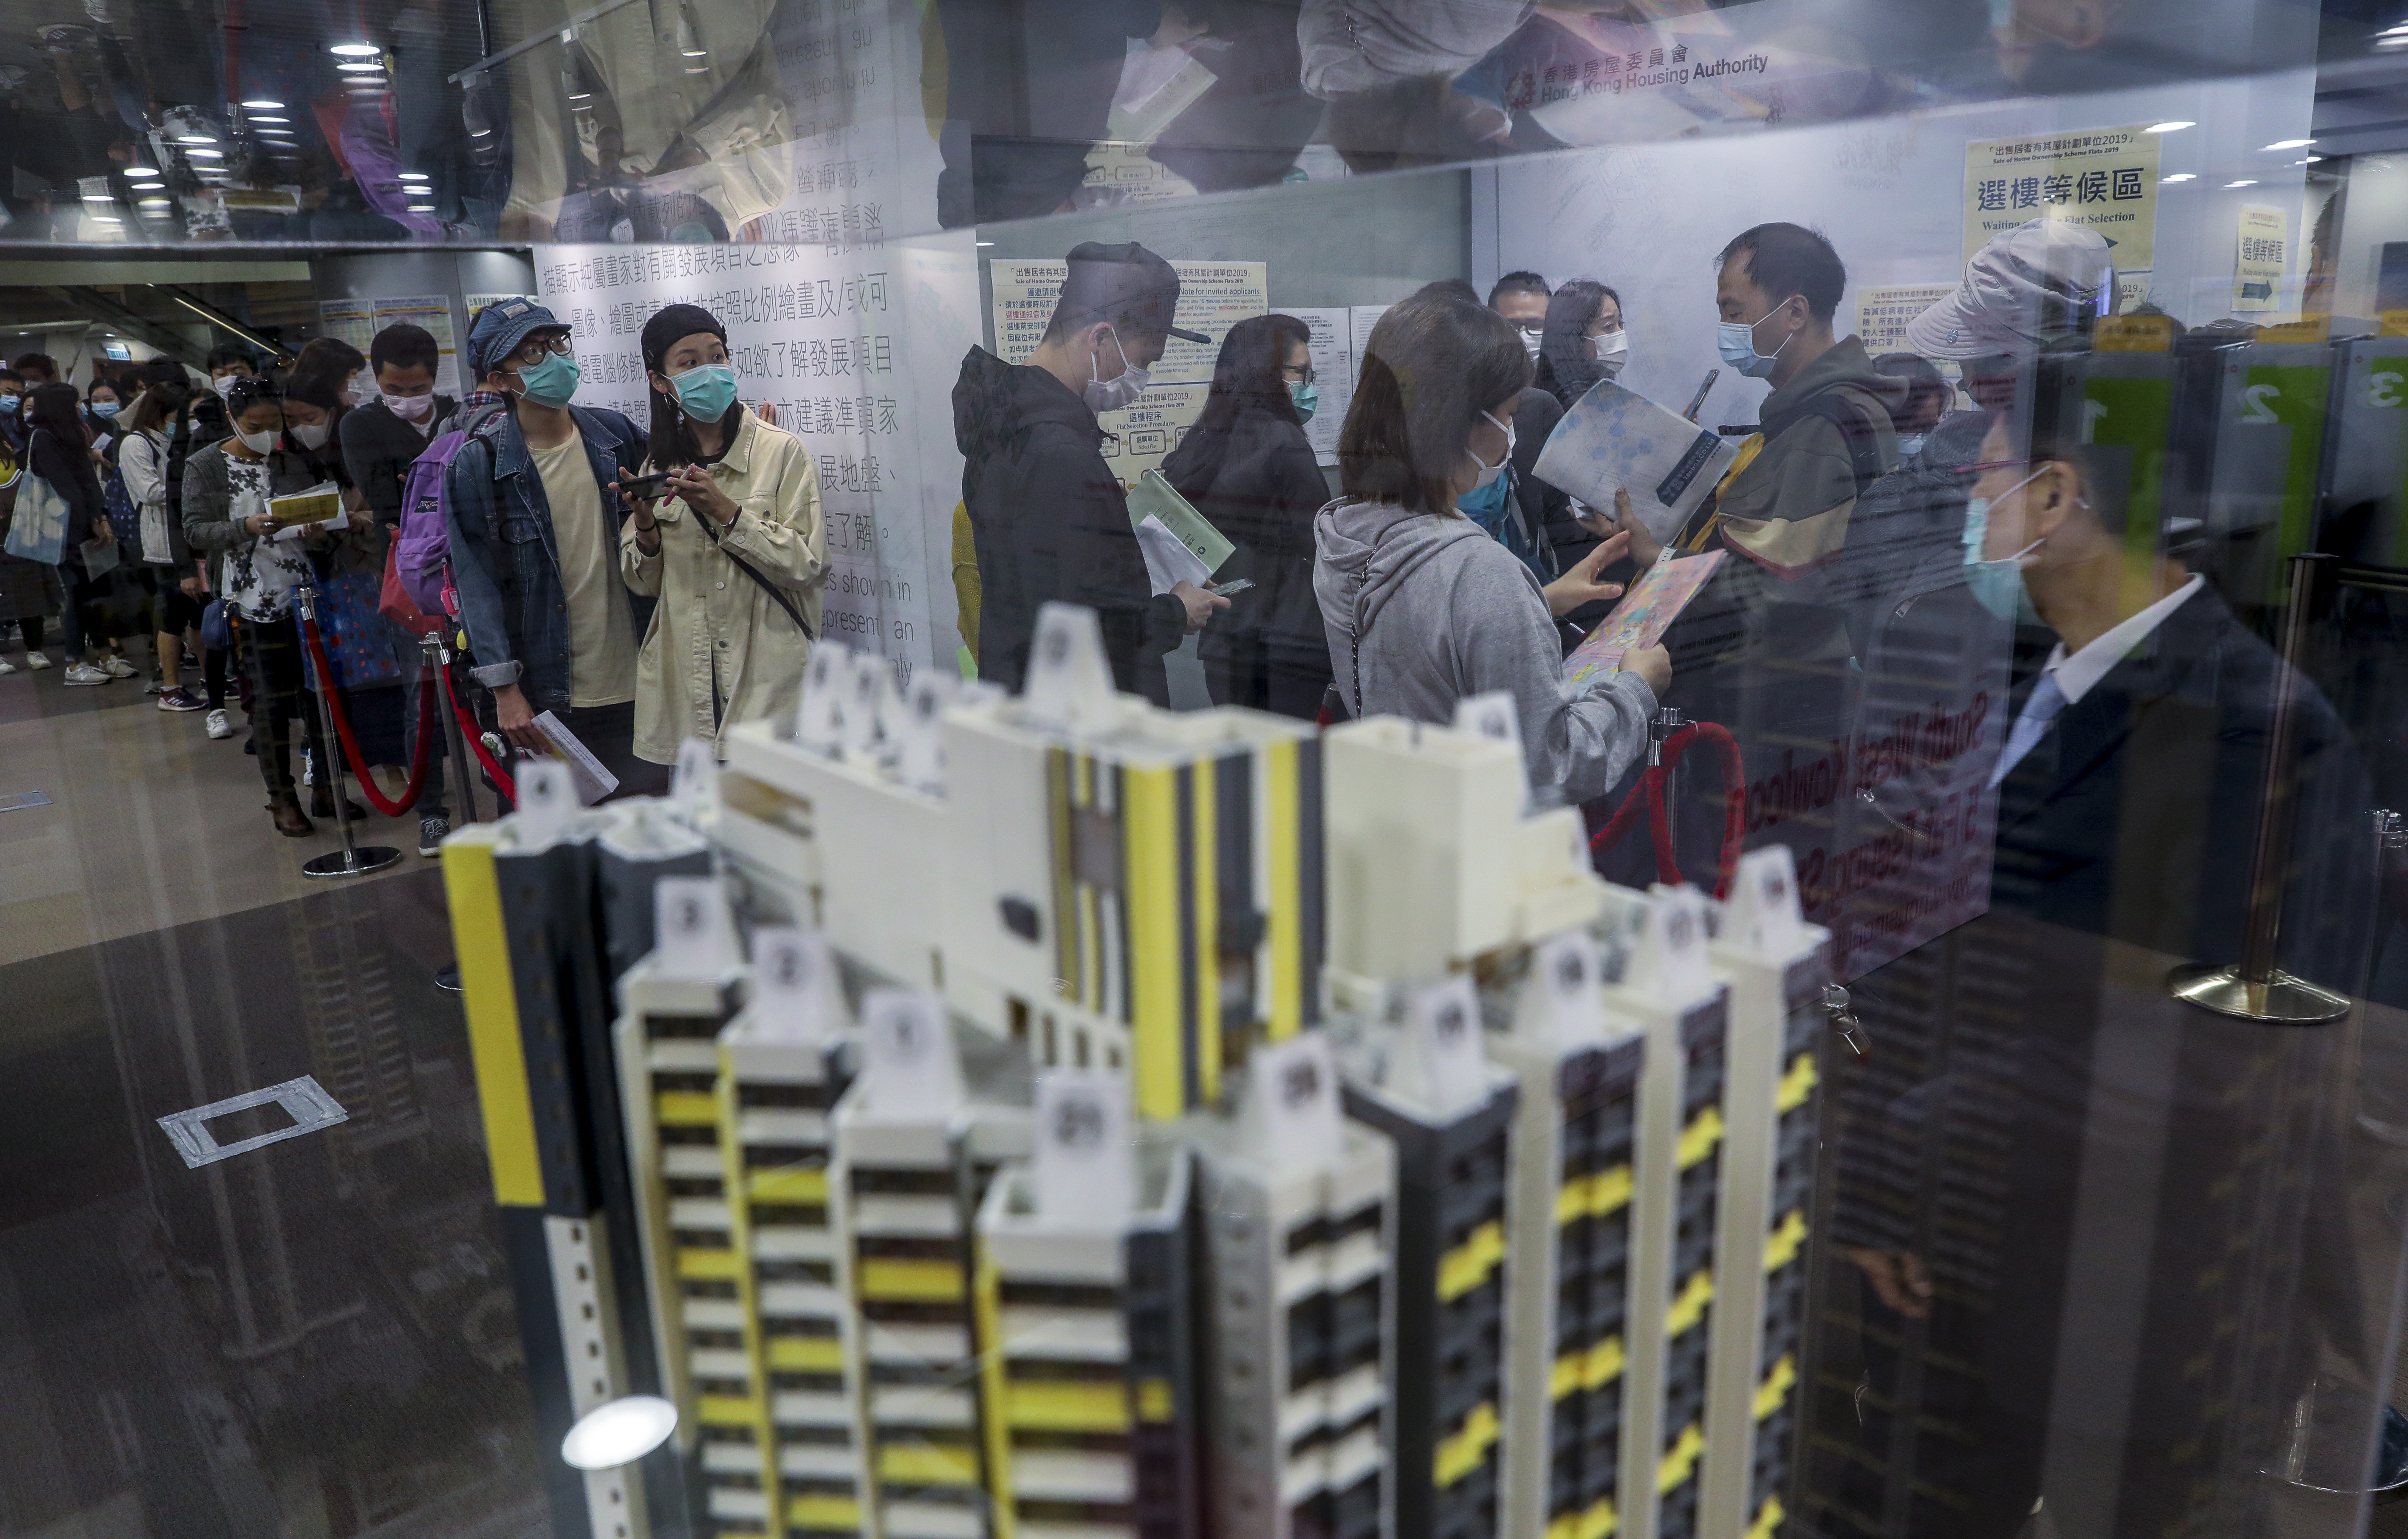 Potential homebuyers wearing protective face masks look at a scale model of Home Ownership Scheme flats in Lok Fu, Hong Kong, amid the novel coronavirus epidemic. Photo: Winson Wong